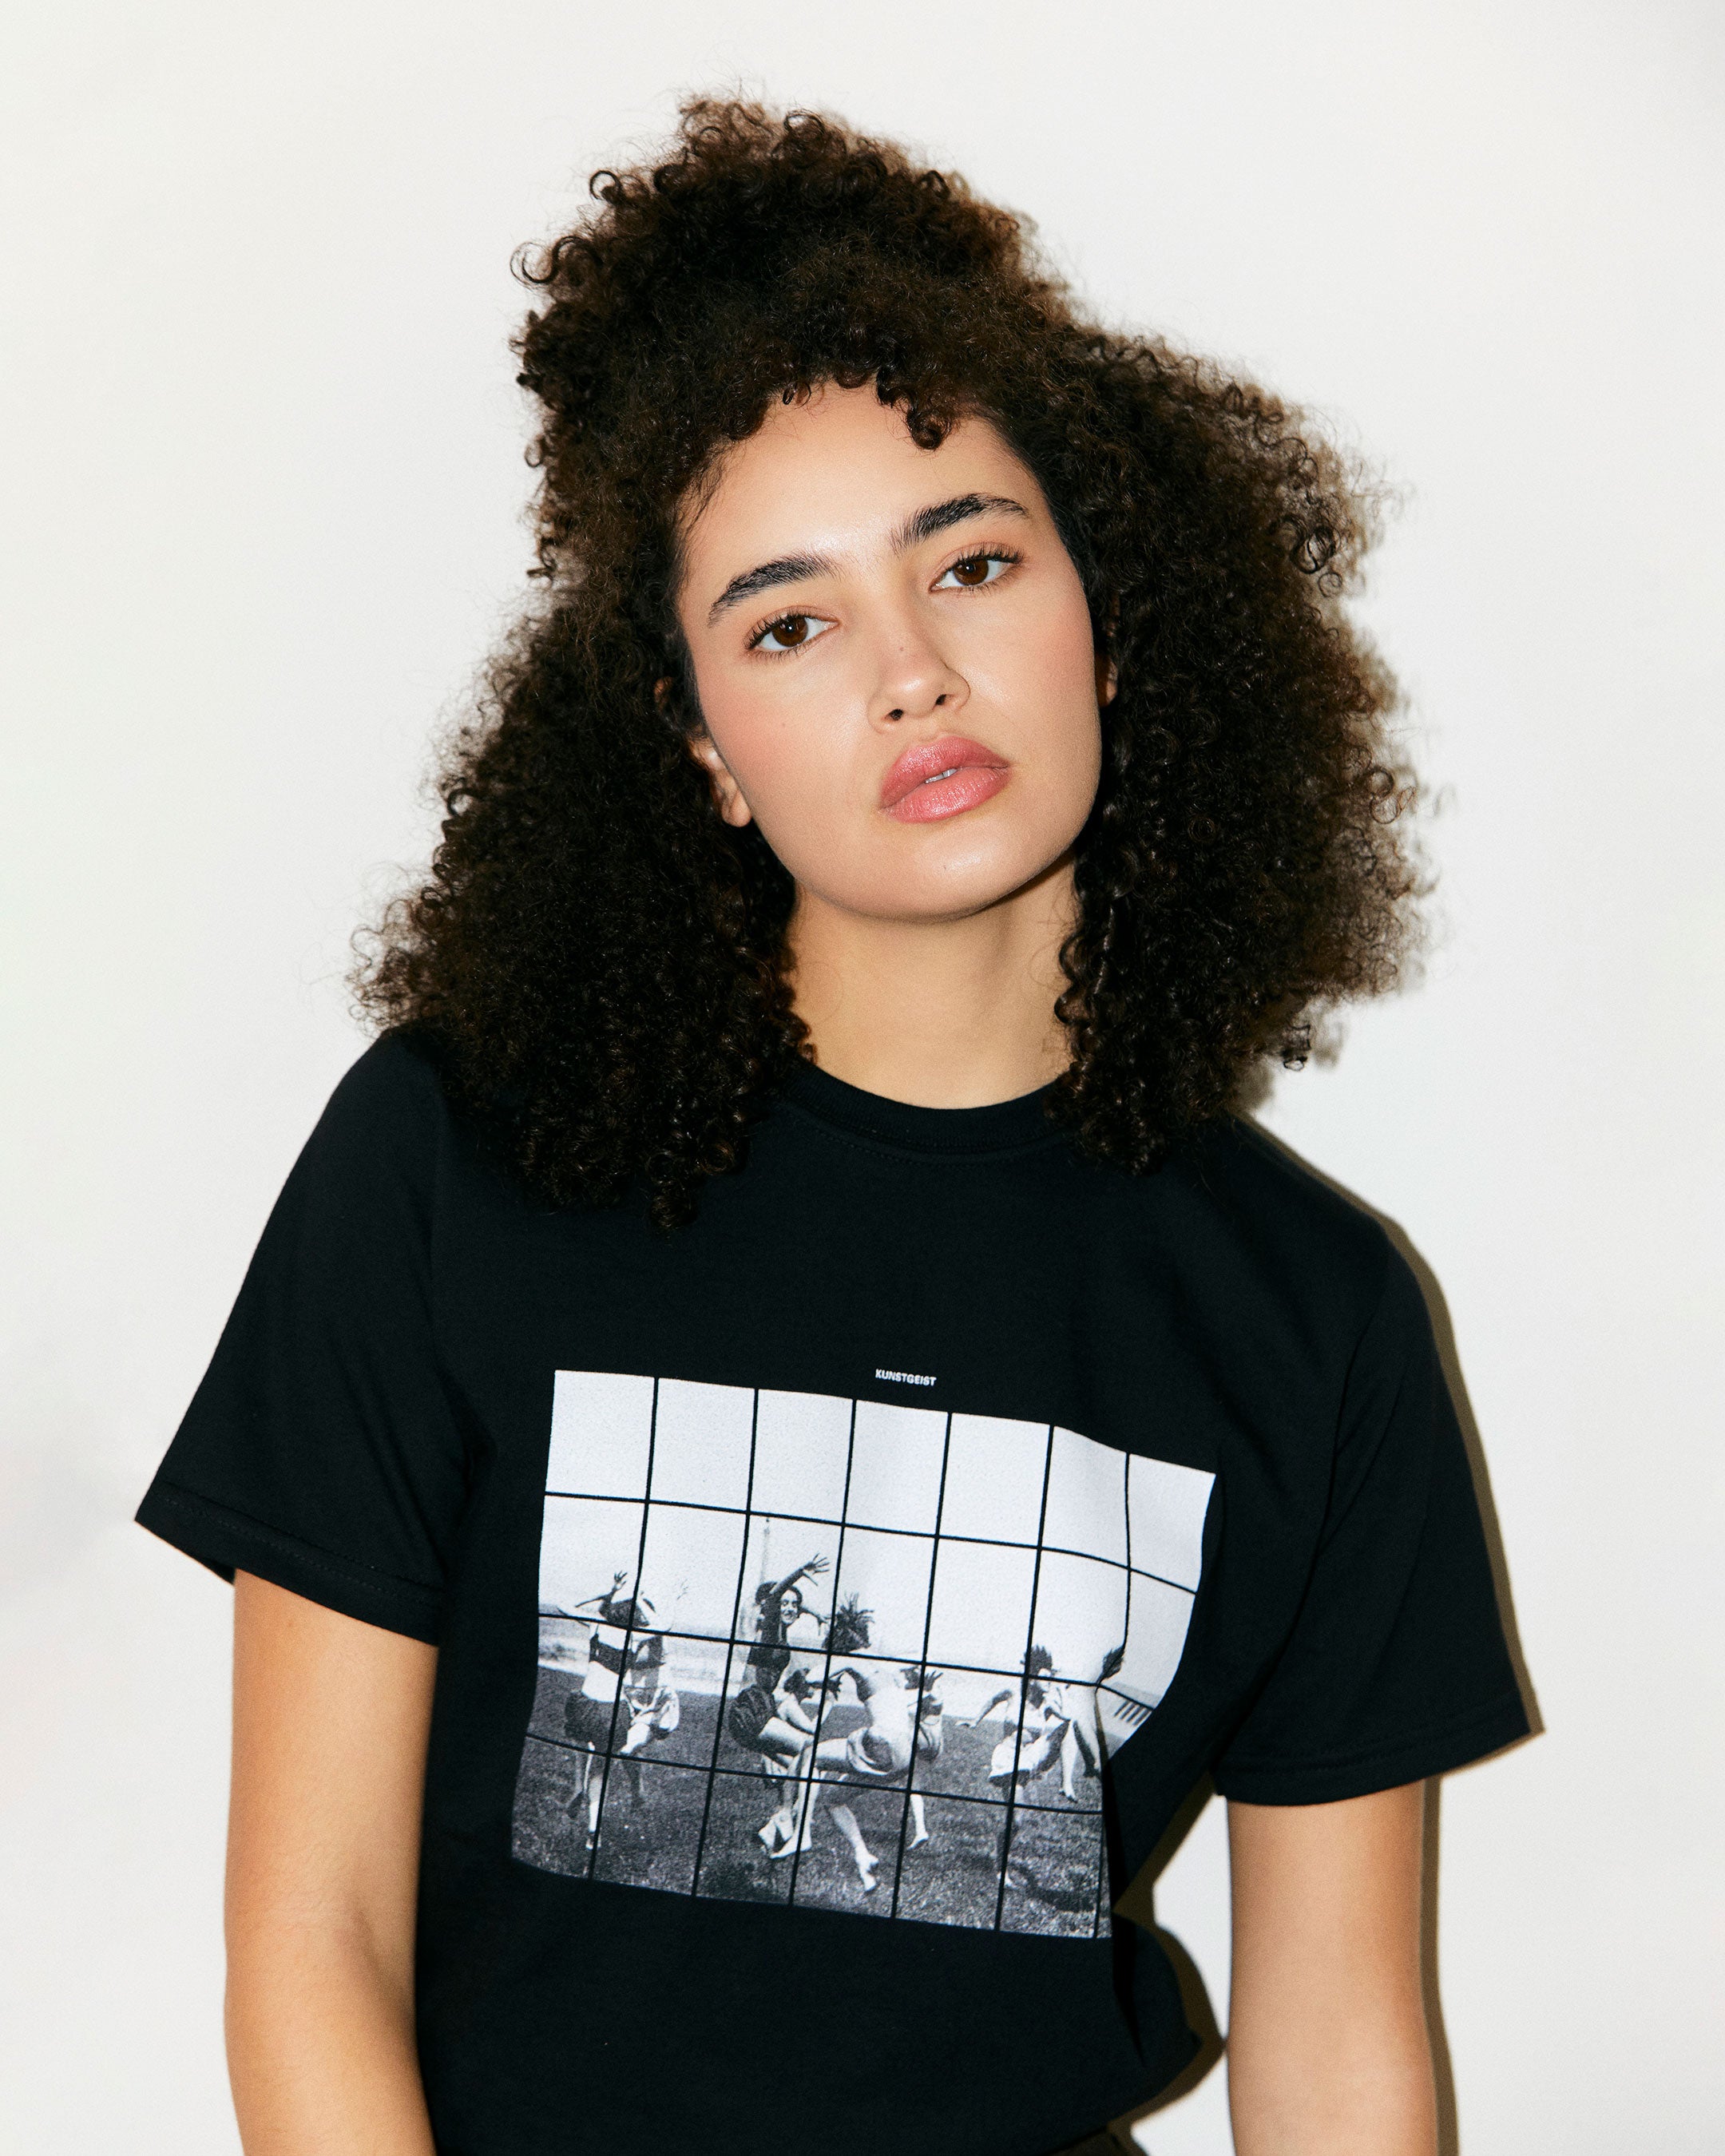 Teodora Marcella wears Black Organic Short Sleeve 100% Cotton Tee with graphic print of Dancing Girls of the Bauhaus from the Bauhaus Collection. 